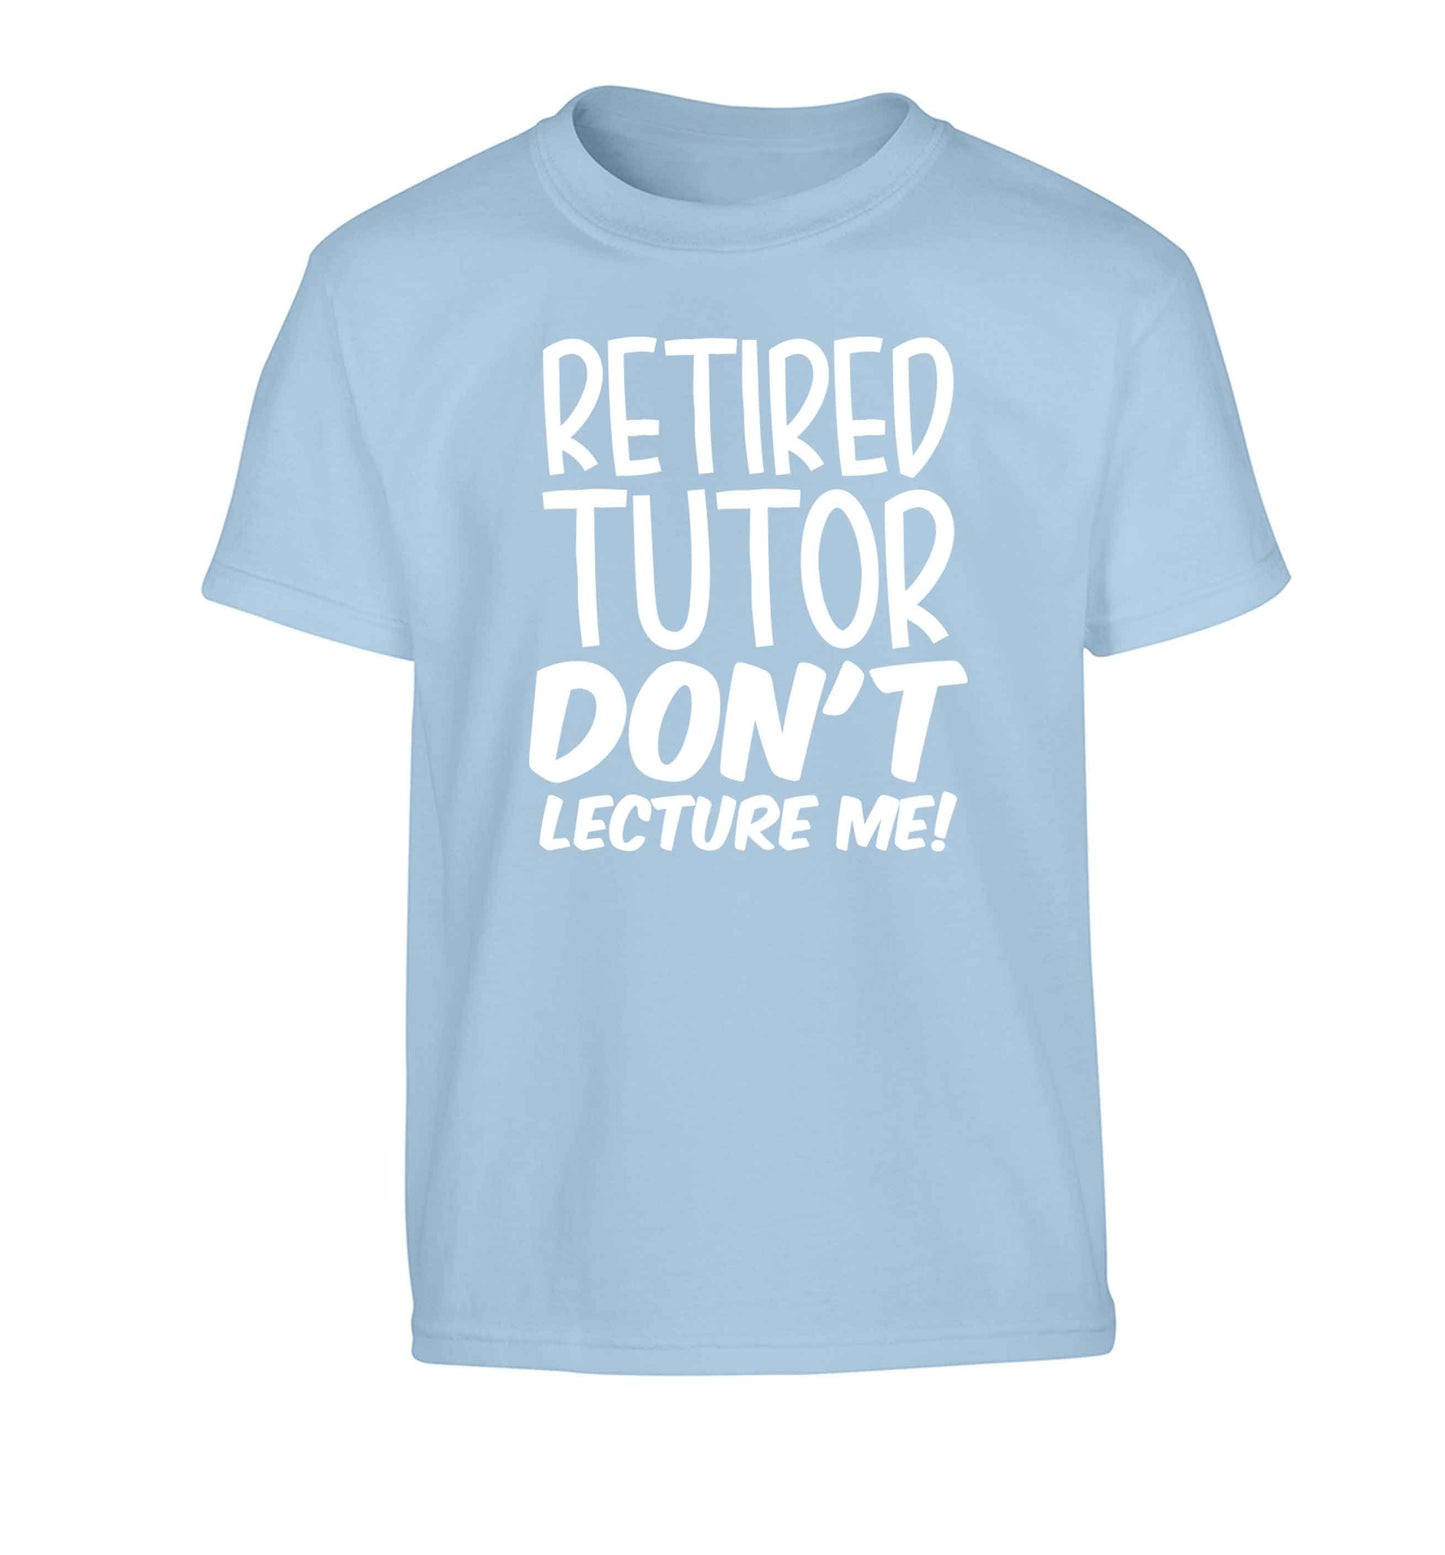 Retired tutor don't lecture me! Children's light blue Tshirt 12-13 Years